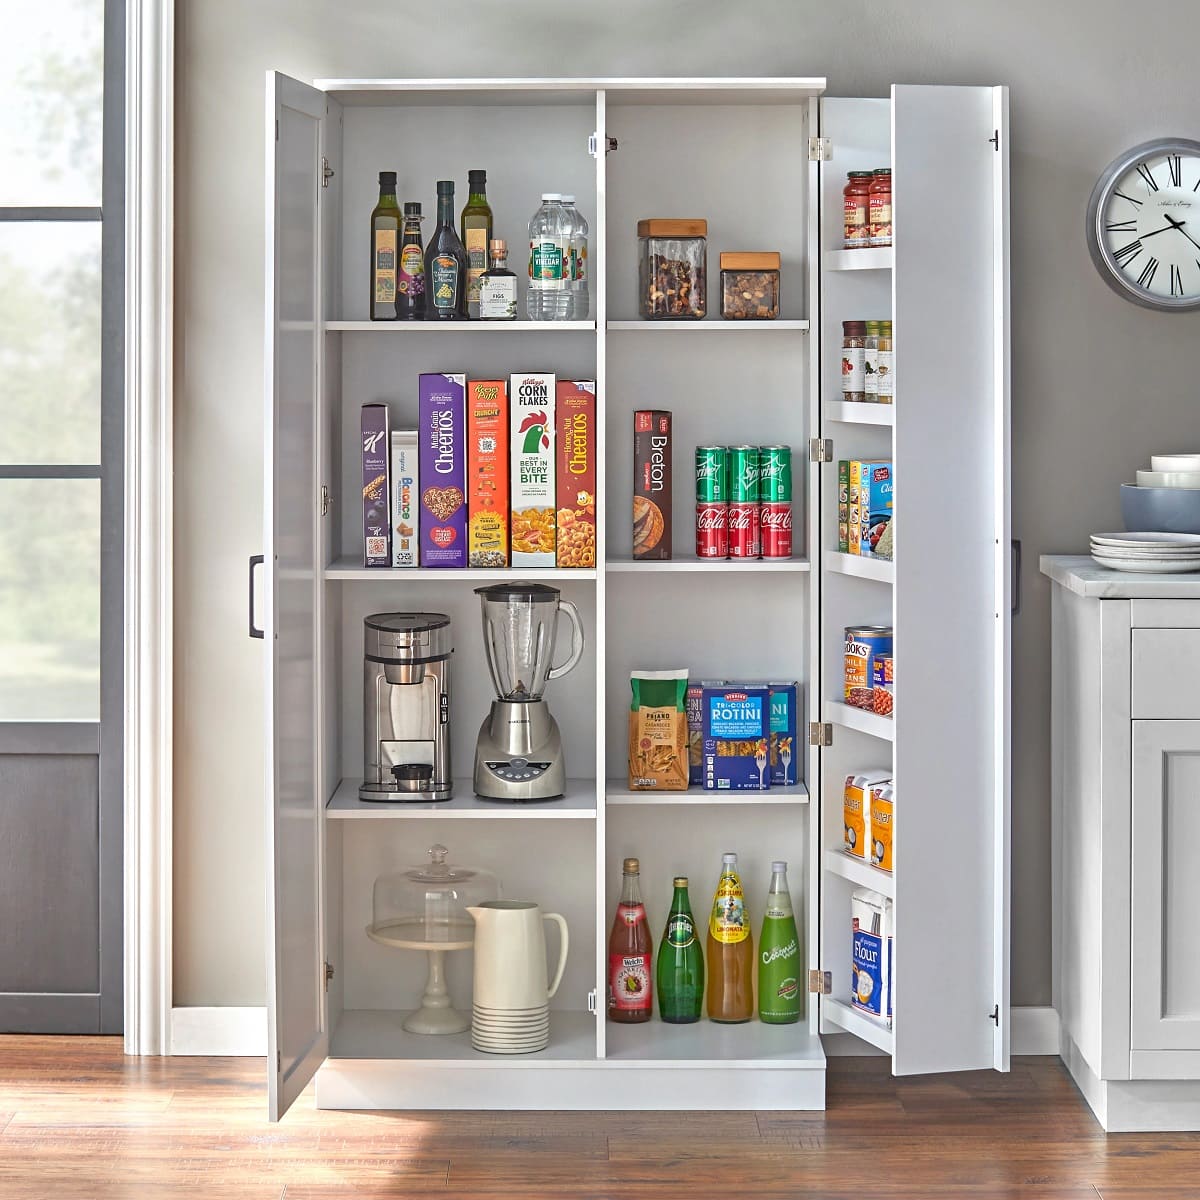 How to Organize a Kitchen Pantry